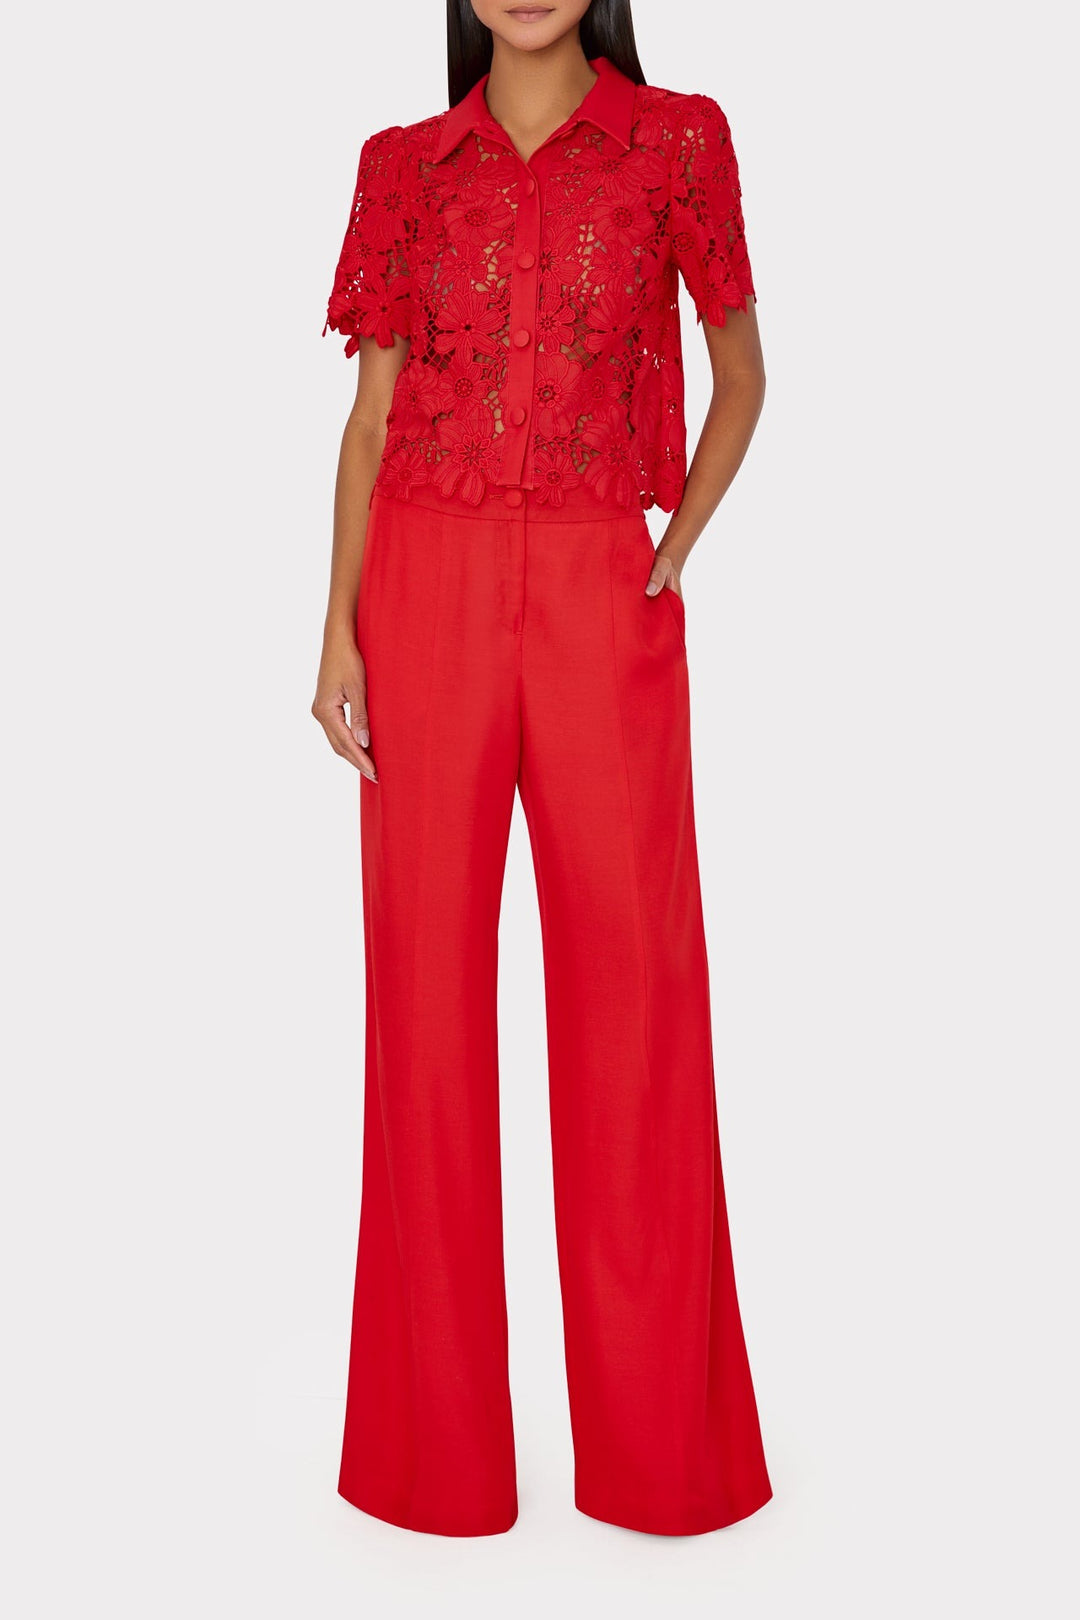 Addison Roja Lace Top in Red